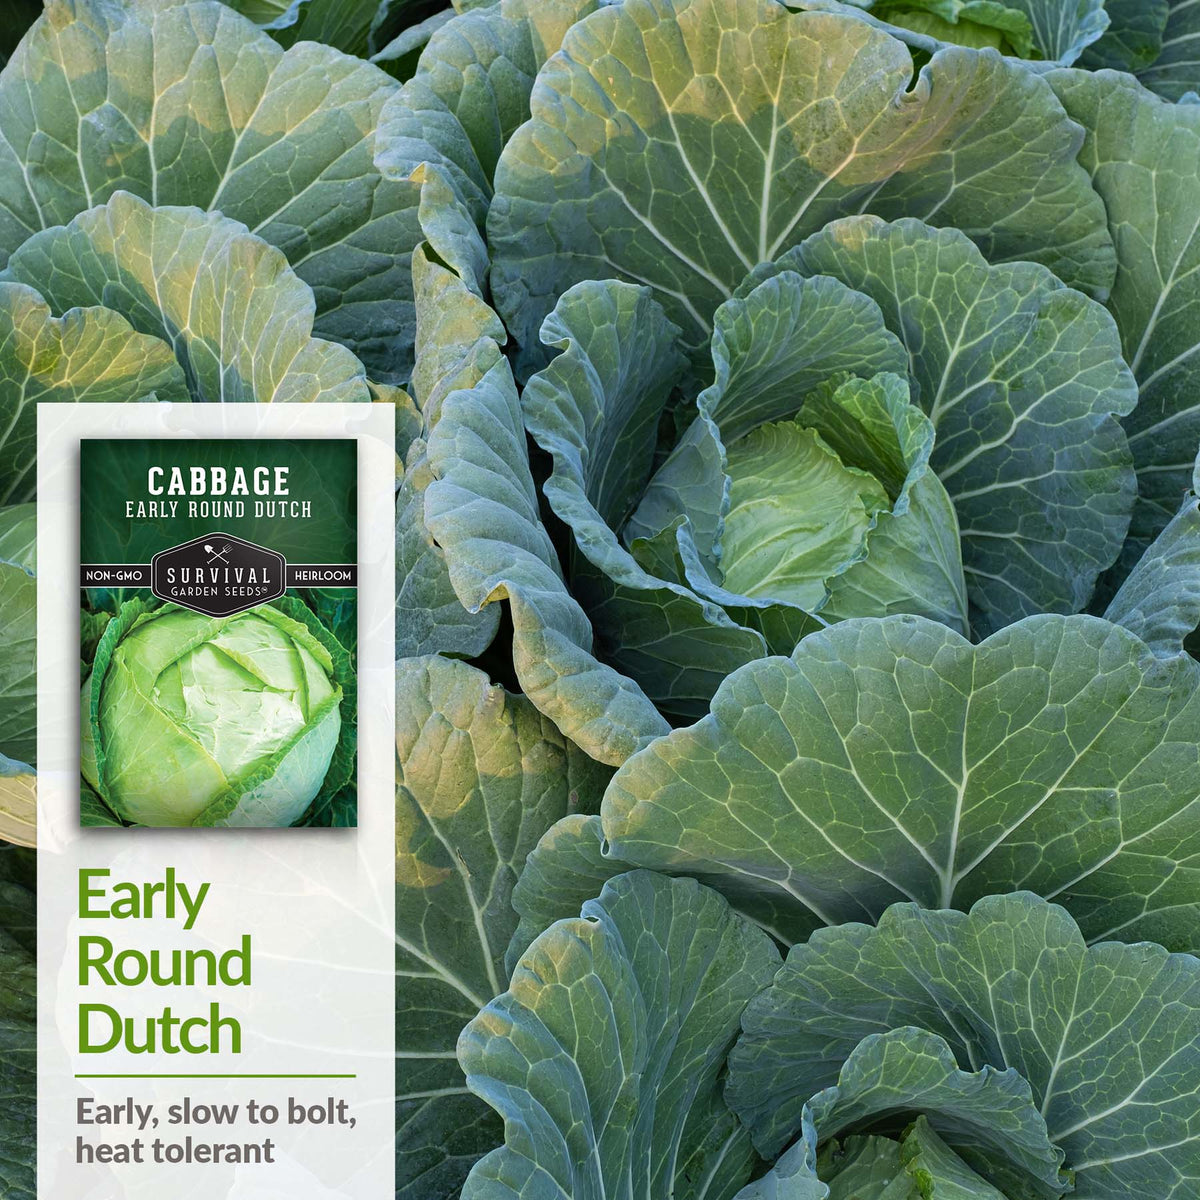 Early Round Dutch Cabbage is an early grower, slow to bolt and heat tolerant